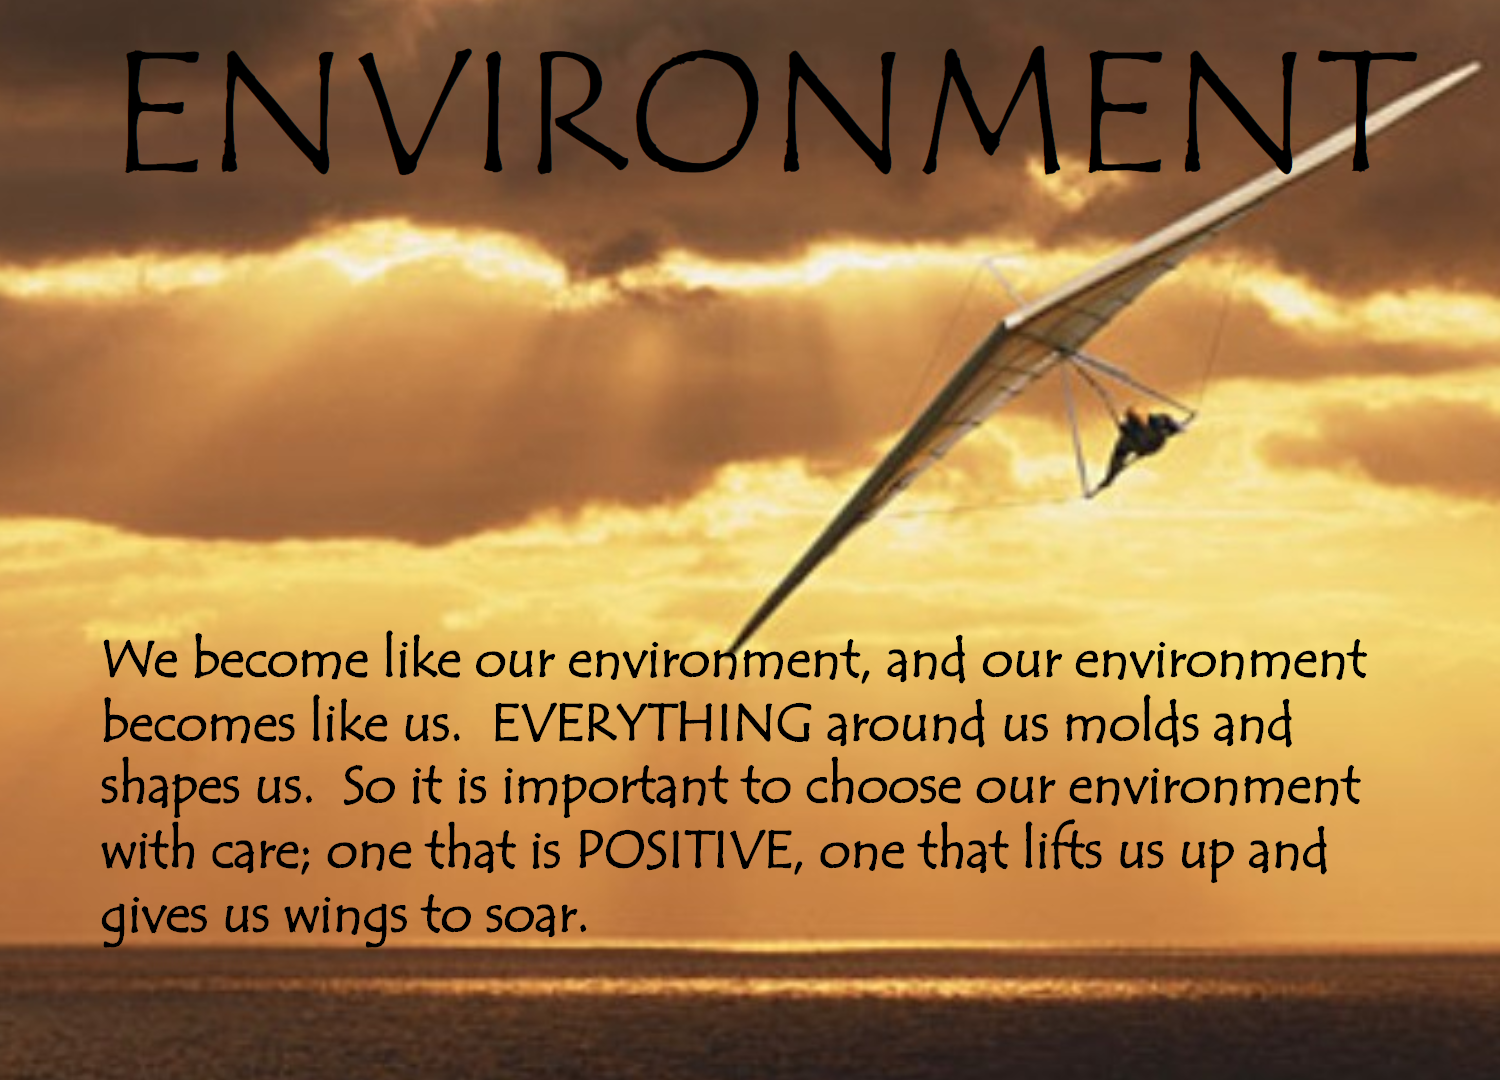 How does environment shape you?